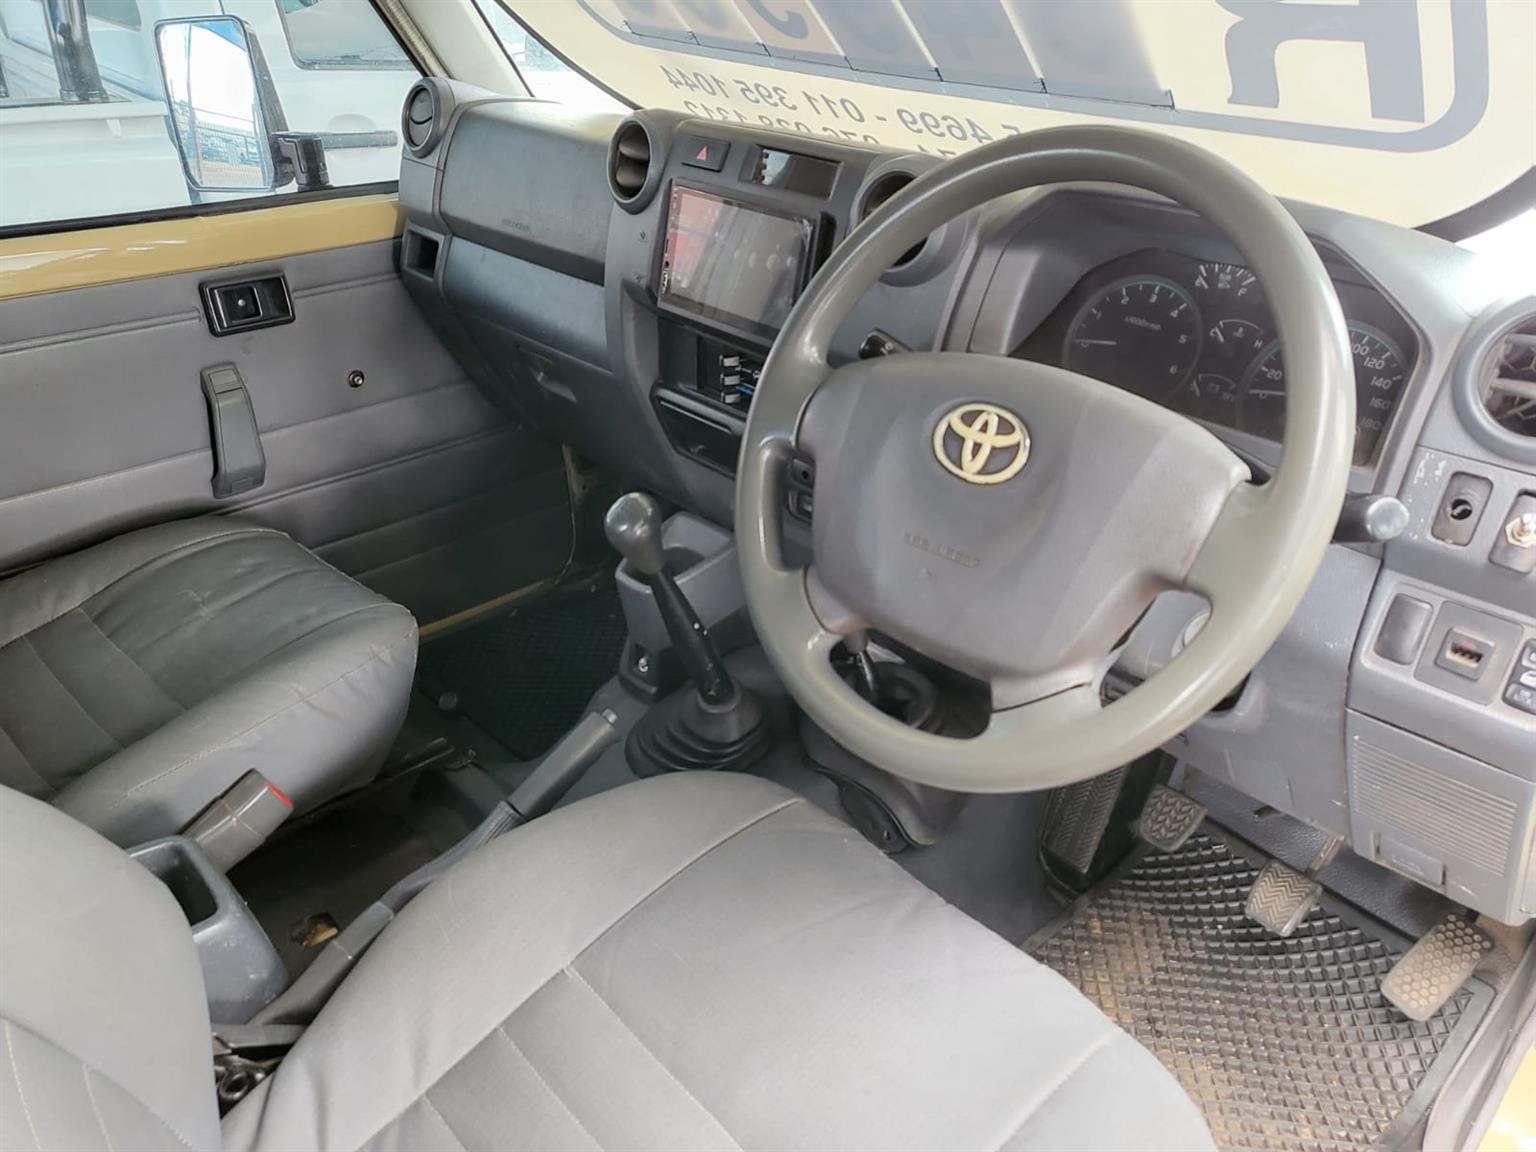 2011 Toyota Land Cruiser 79 4.2D Pick-Up S/C Good Condition Low Mileage 59,000km